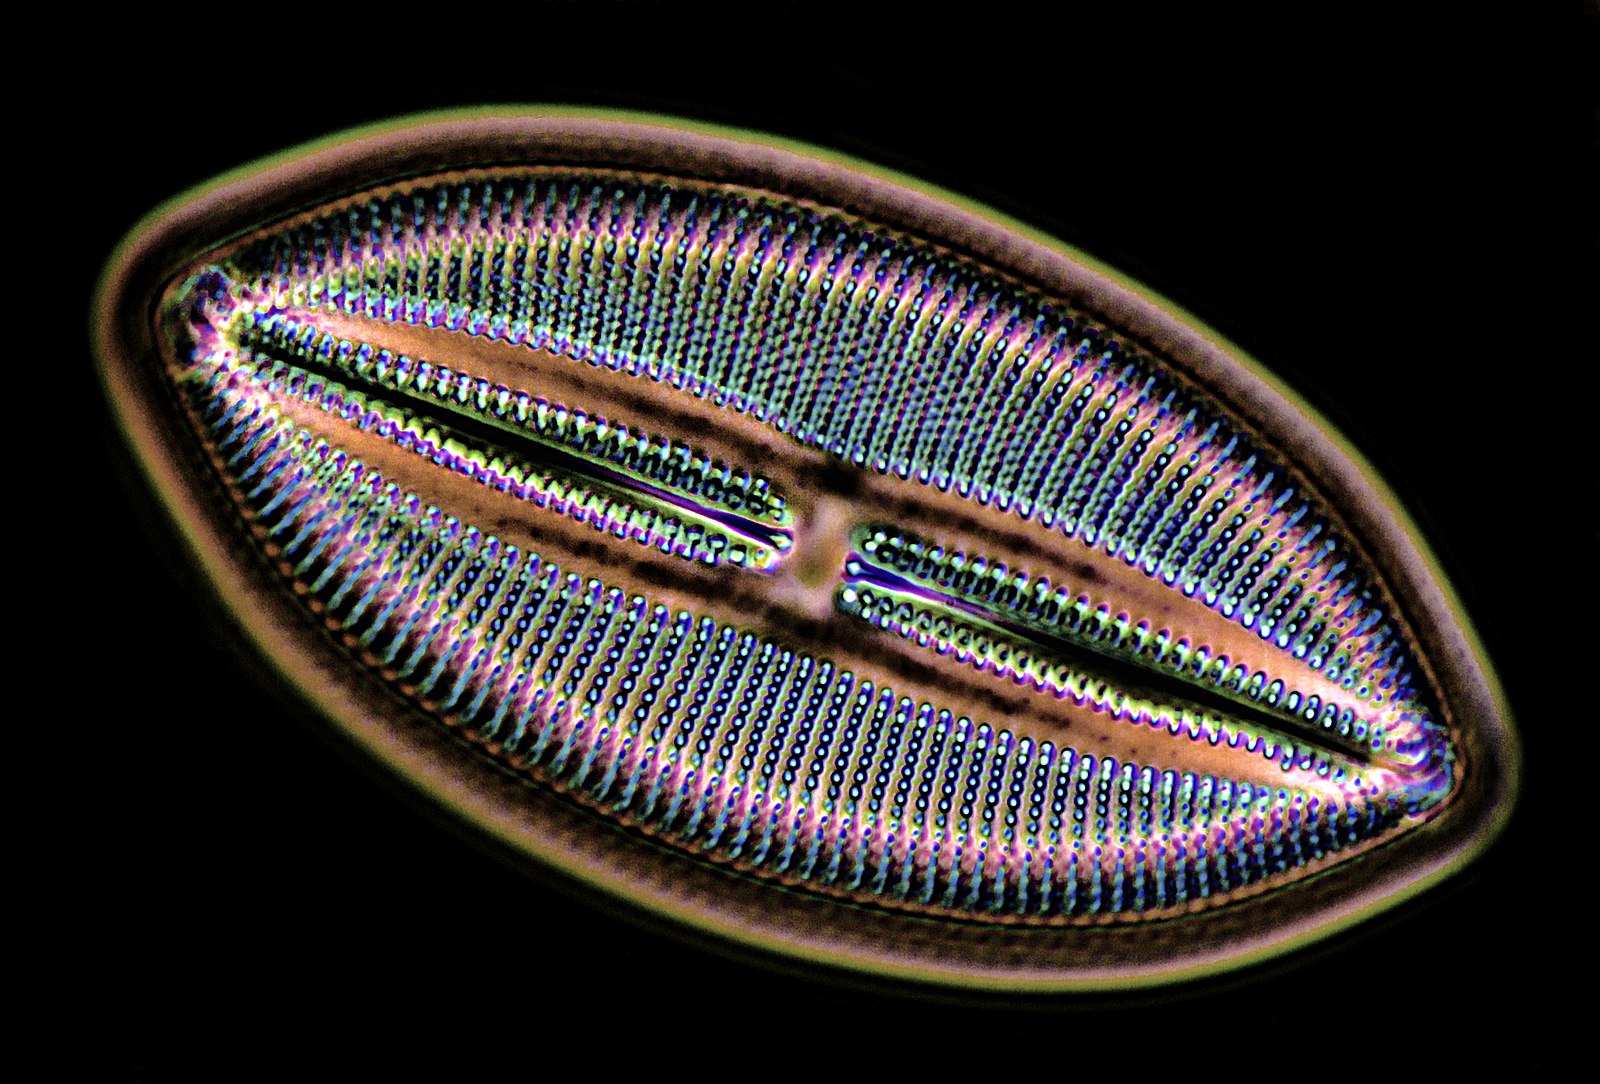 Incredible details of an opalized silica frustule under 1500x magnification.